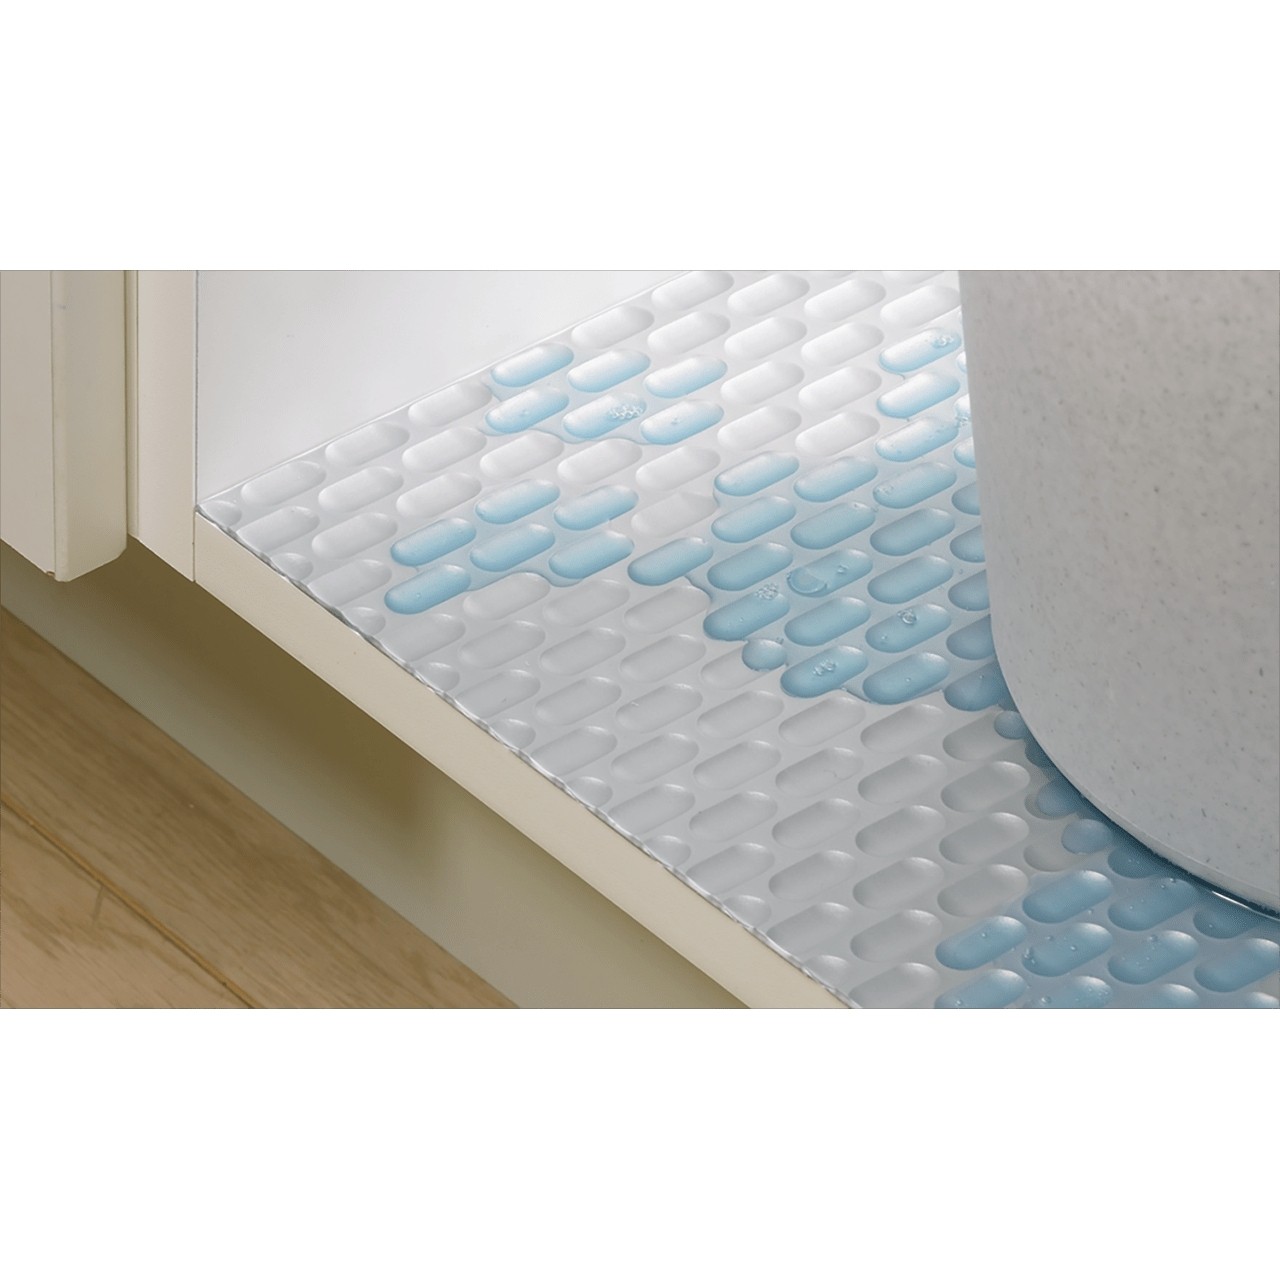 Waterproof mat 1200 x 580 - Easy to assemble kitchen accessories